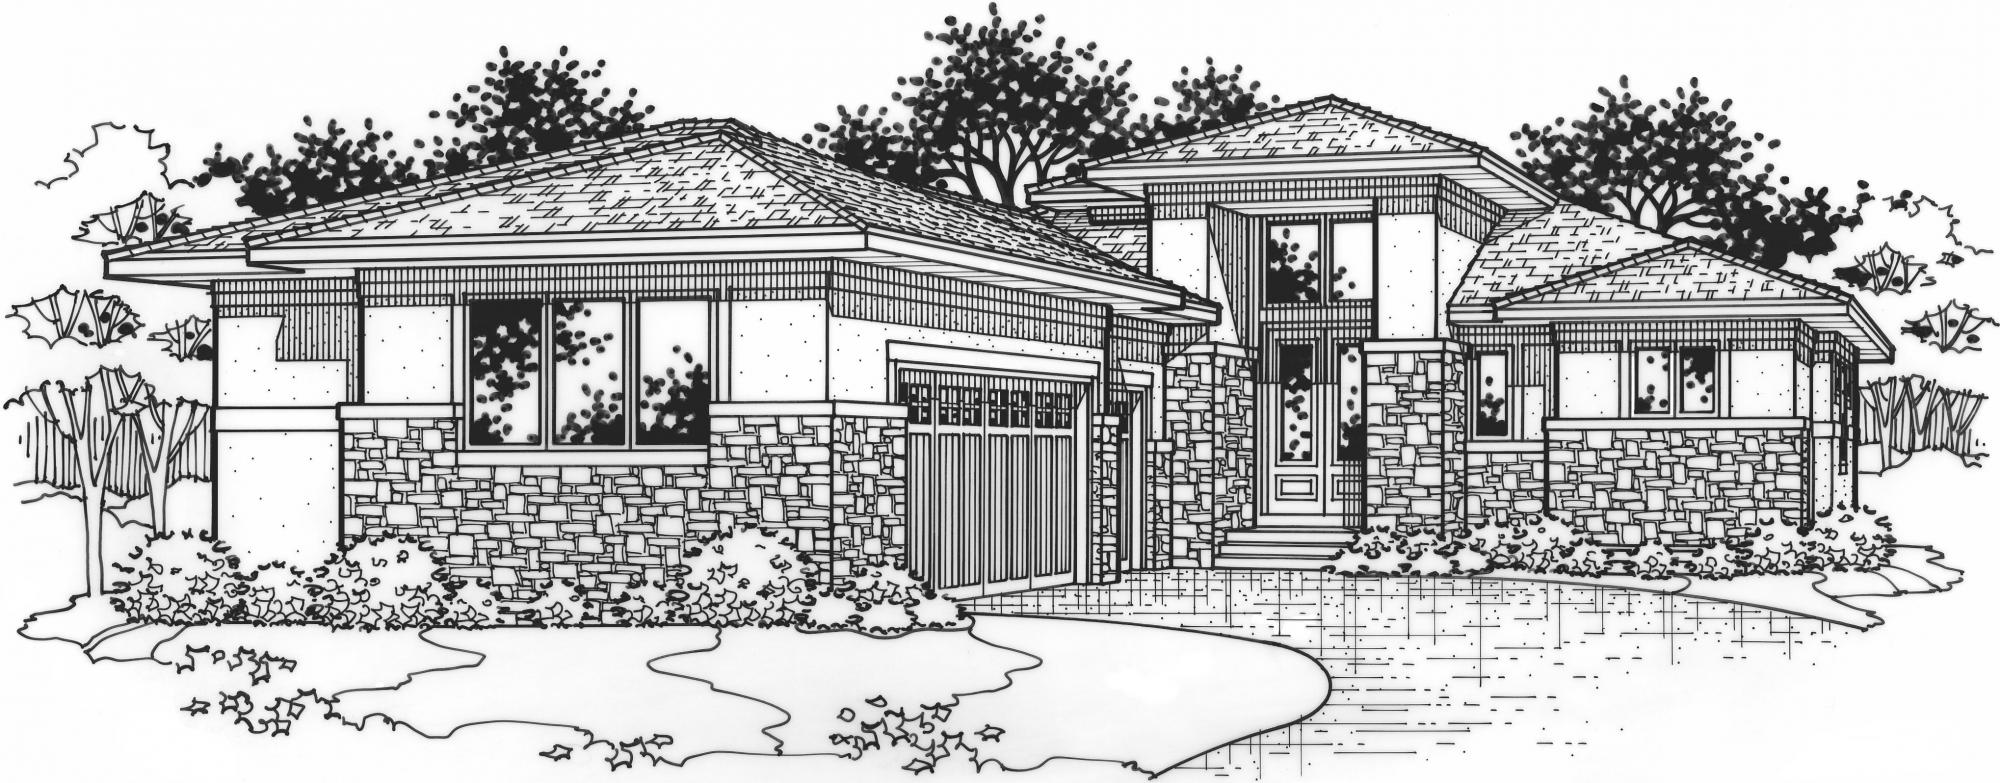 black and white rendering of a peachtree model from Lambie custom homes